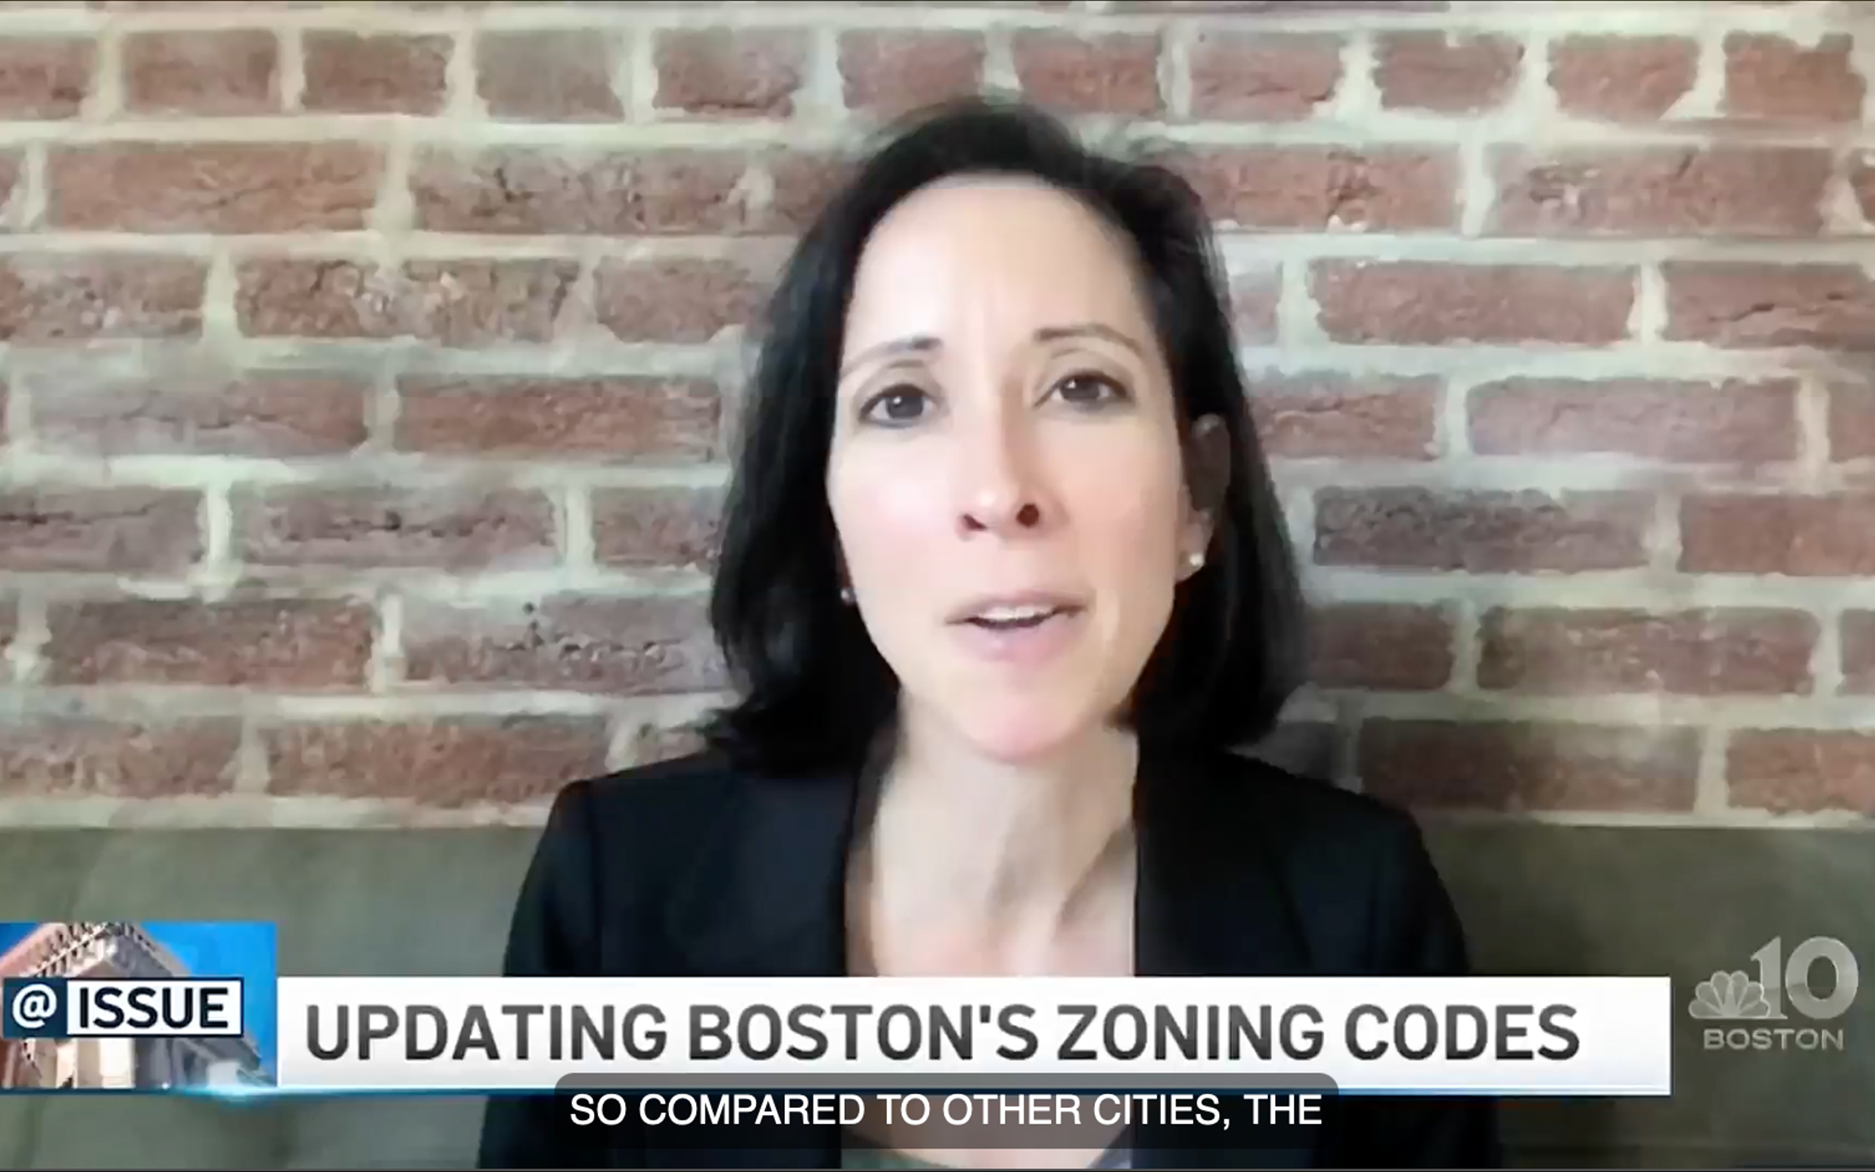 Professor Bronin on the news. The description "updating Boston's zoning codes" reads at the bottom